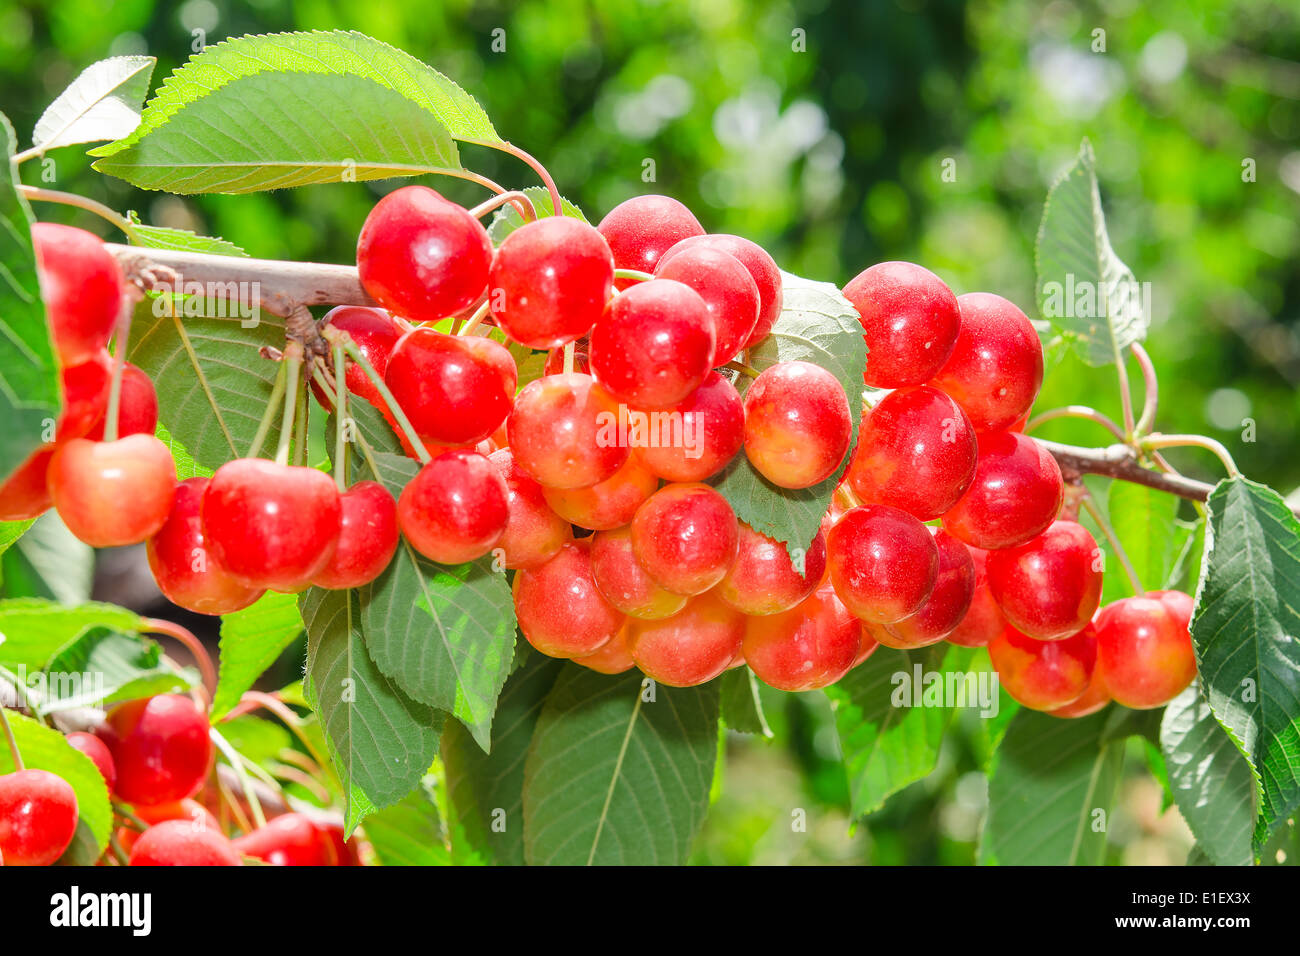 Sunlit ripe white rainier cherry sweet juicy berry bunches on tree branch in sunny orchard Stock Photo